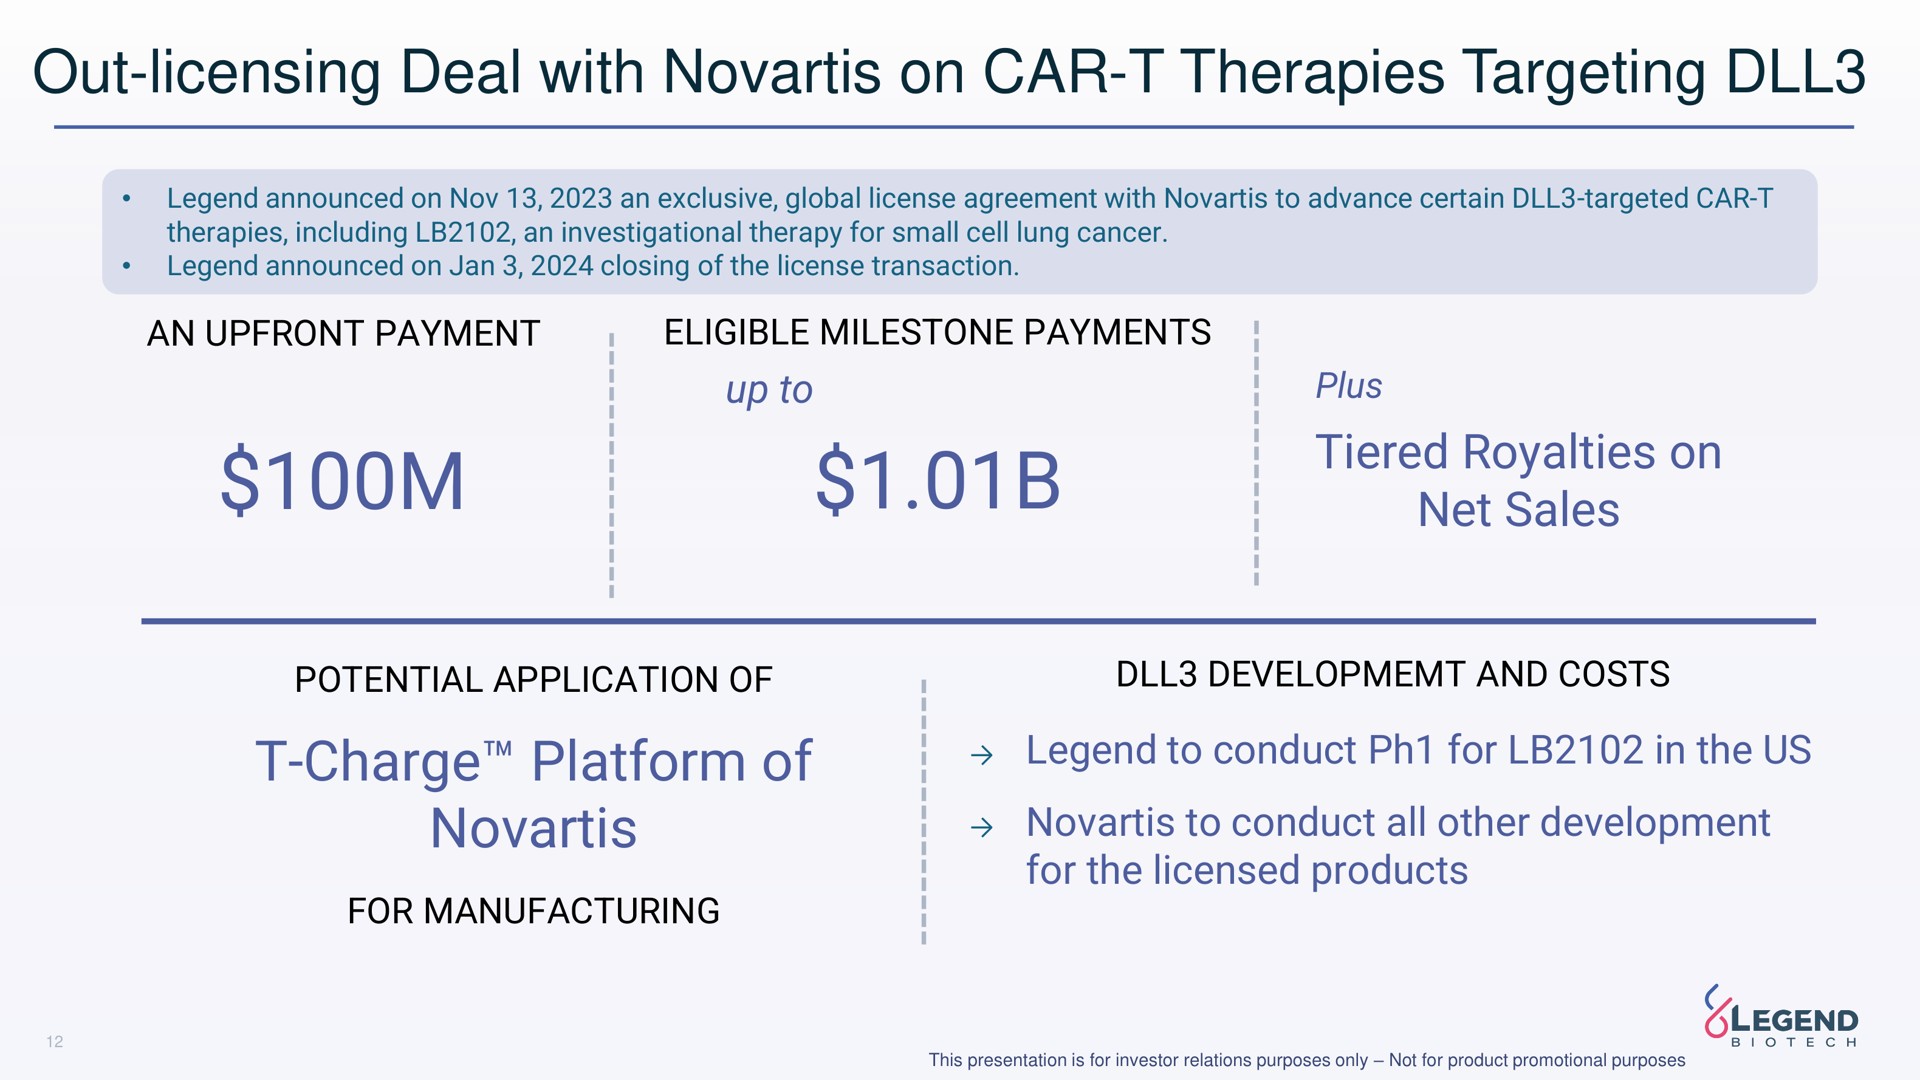 out licensing deal with on car therapies targeting tiered royalties on net sales charge platform of as to conduct all other development | Legend Biotech